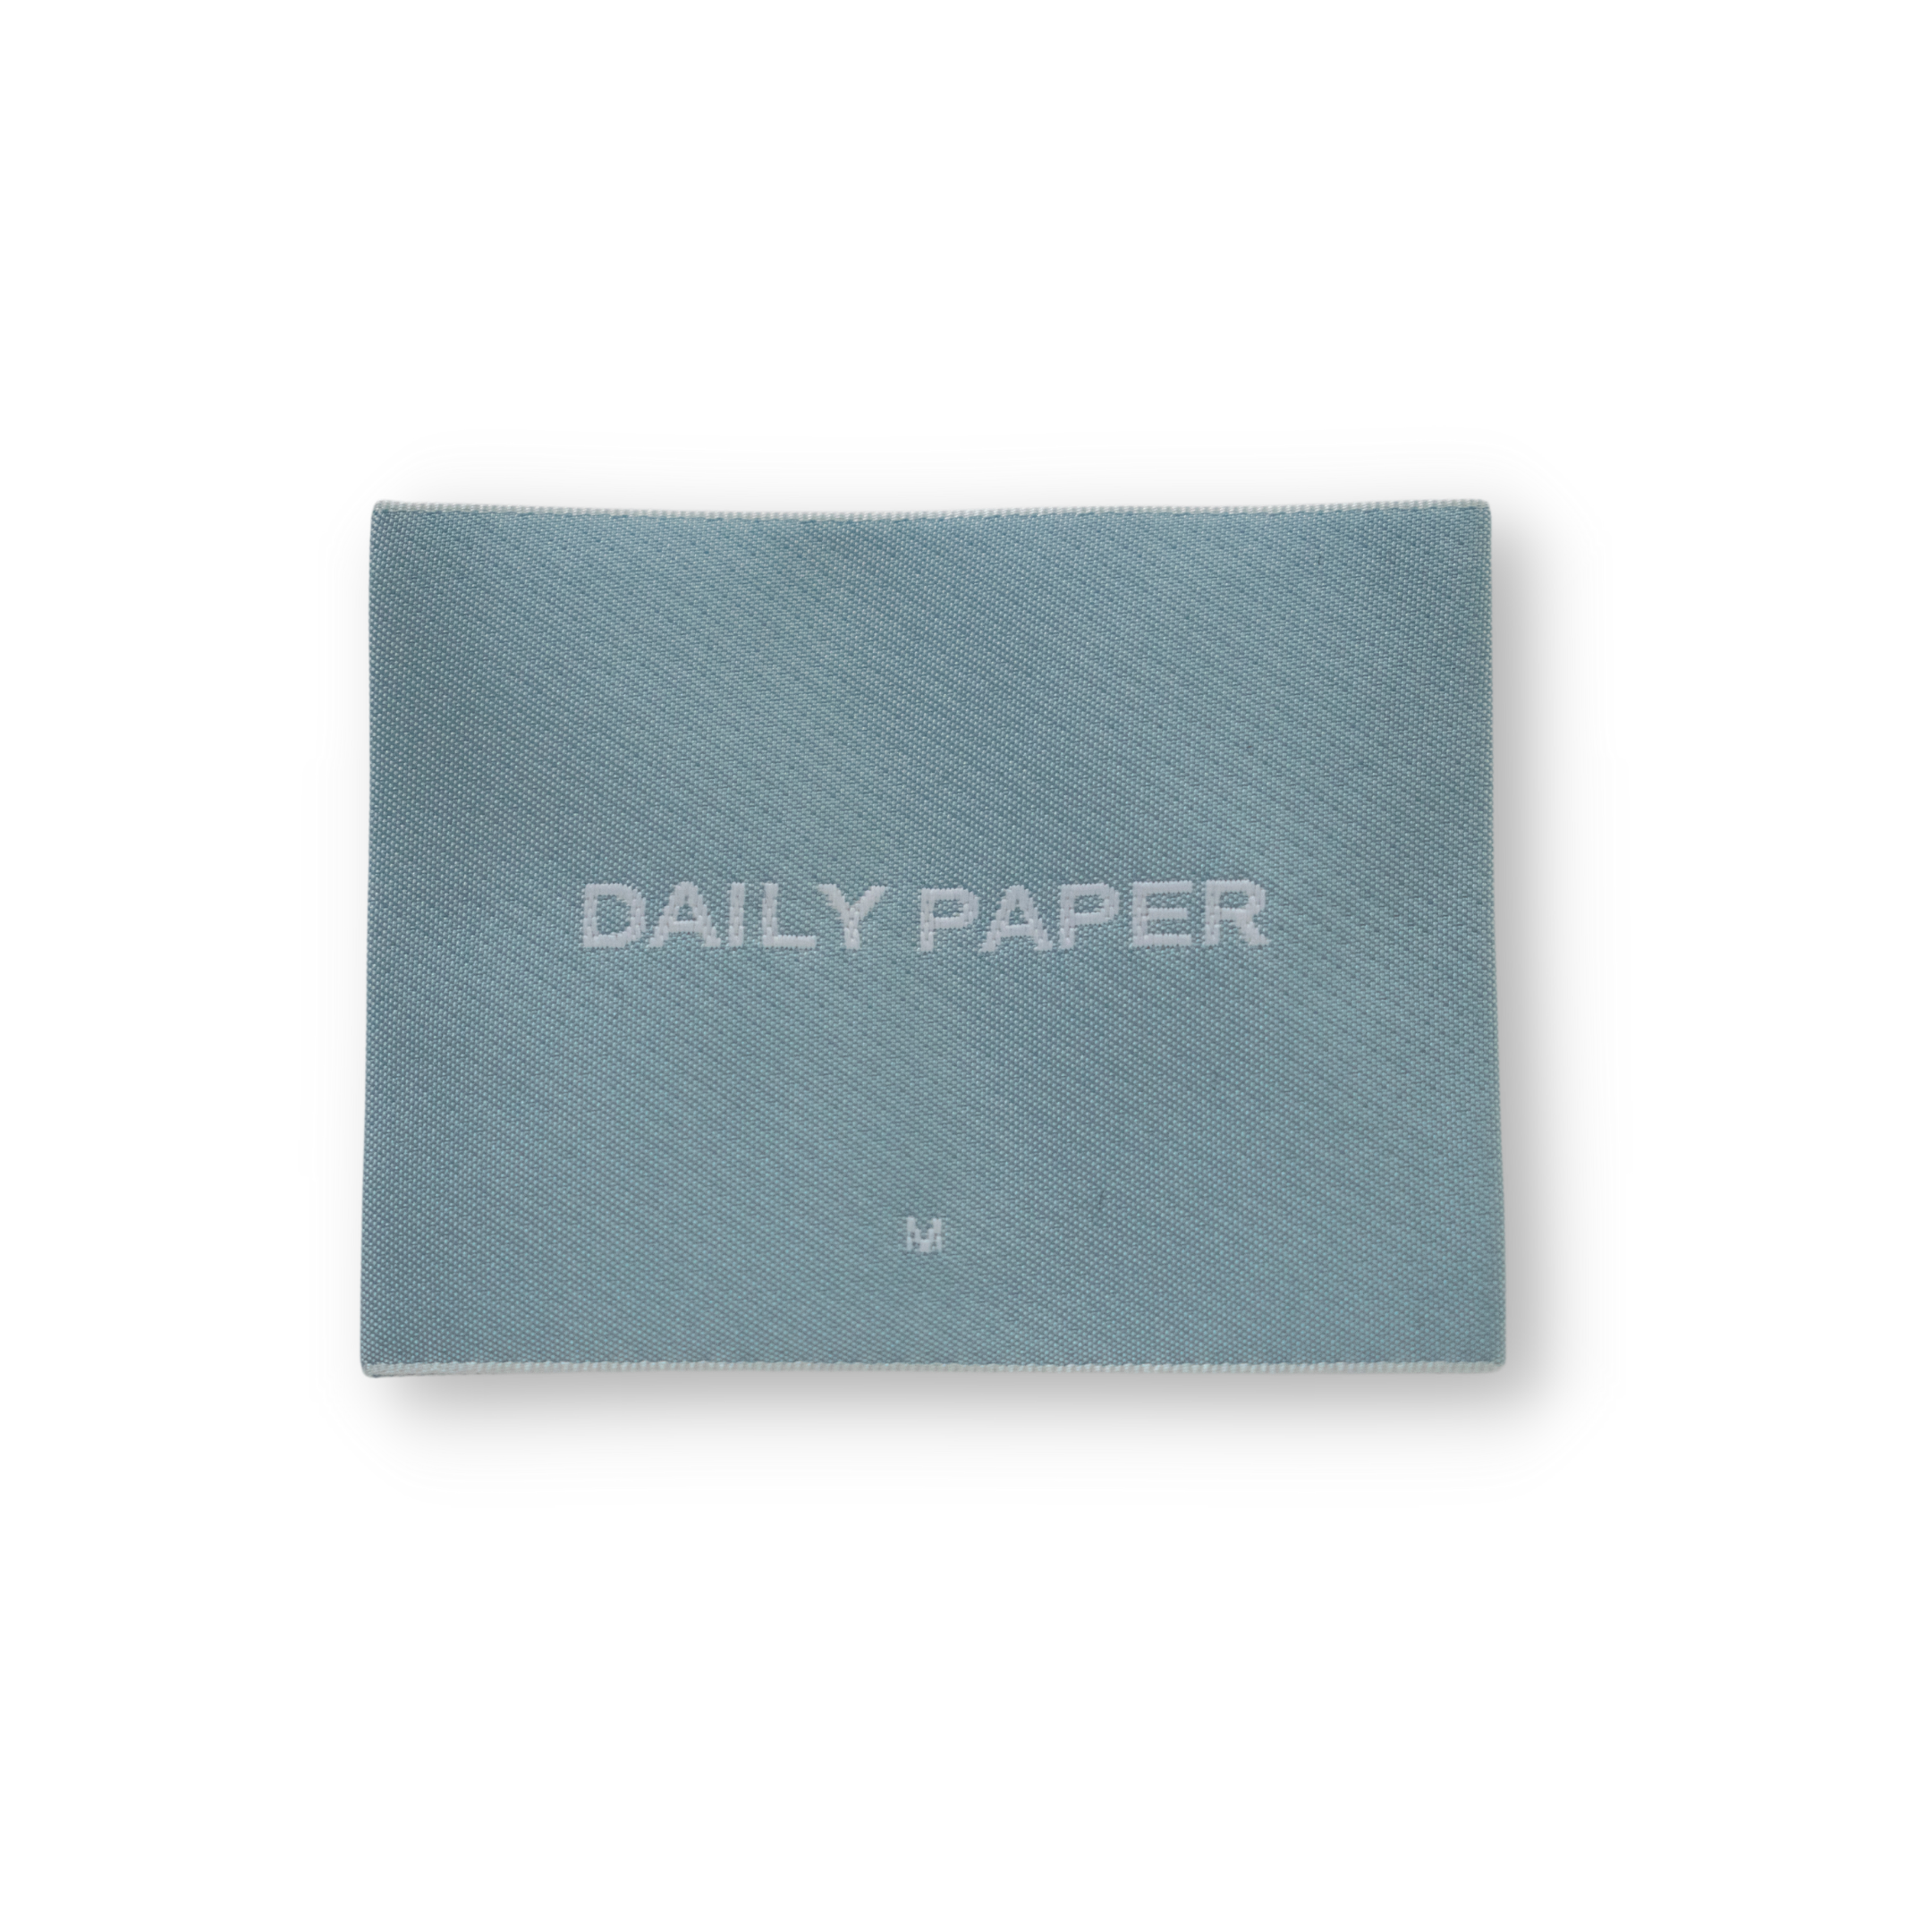 DAILY PAPER Satin Woven Label